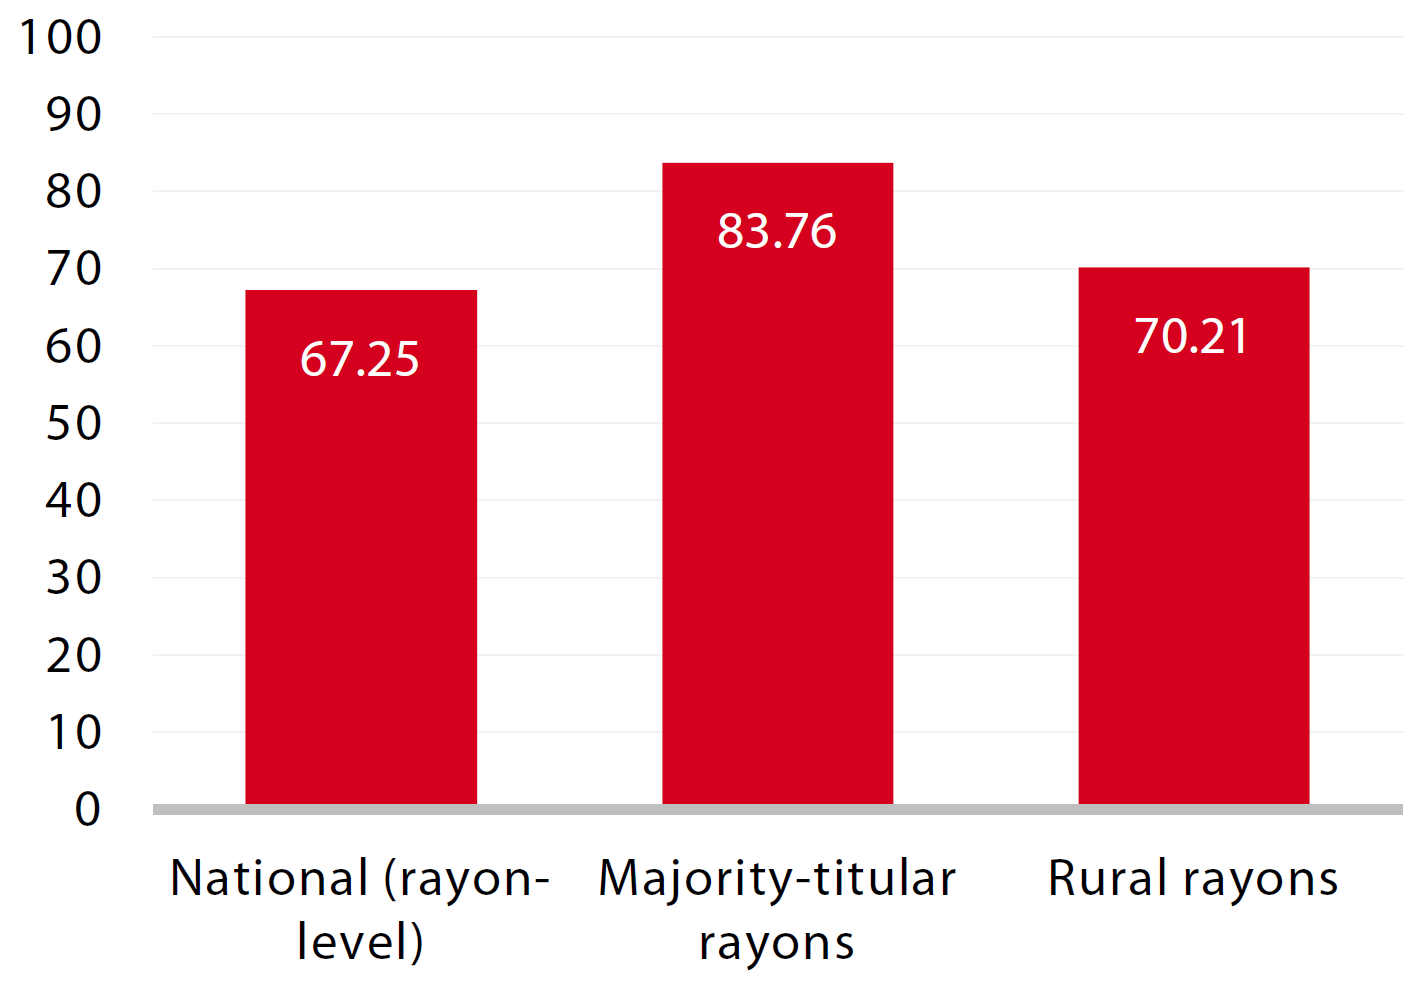 Figure 3: Rayon-level comparison of turnout in the 2012 Russian presidential election